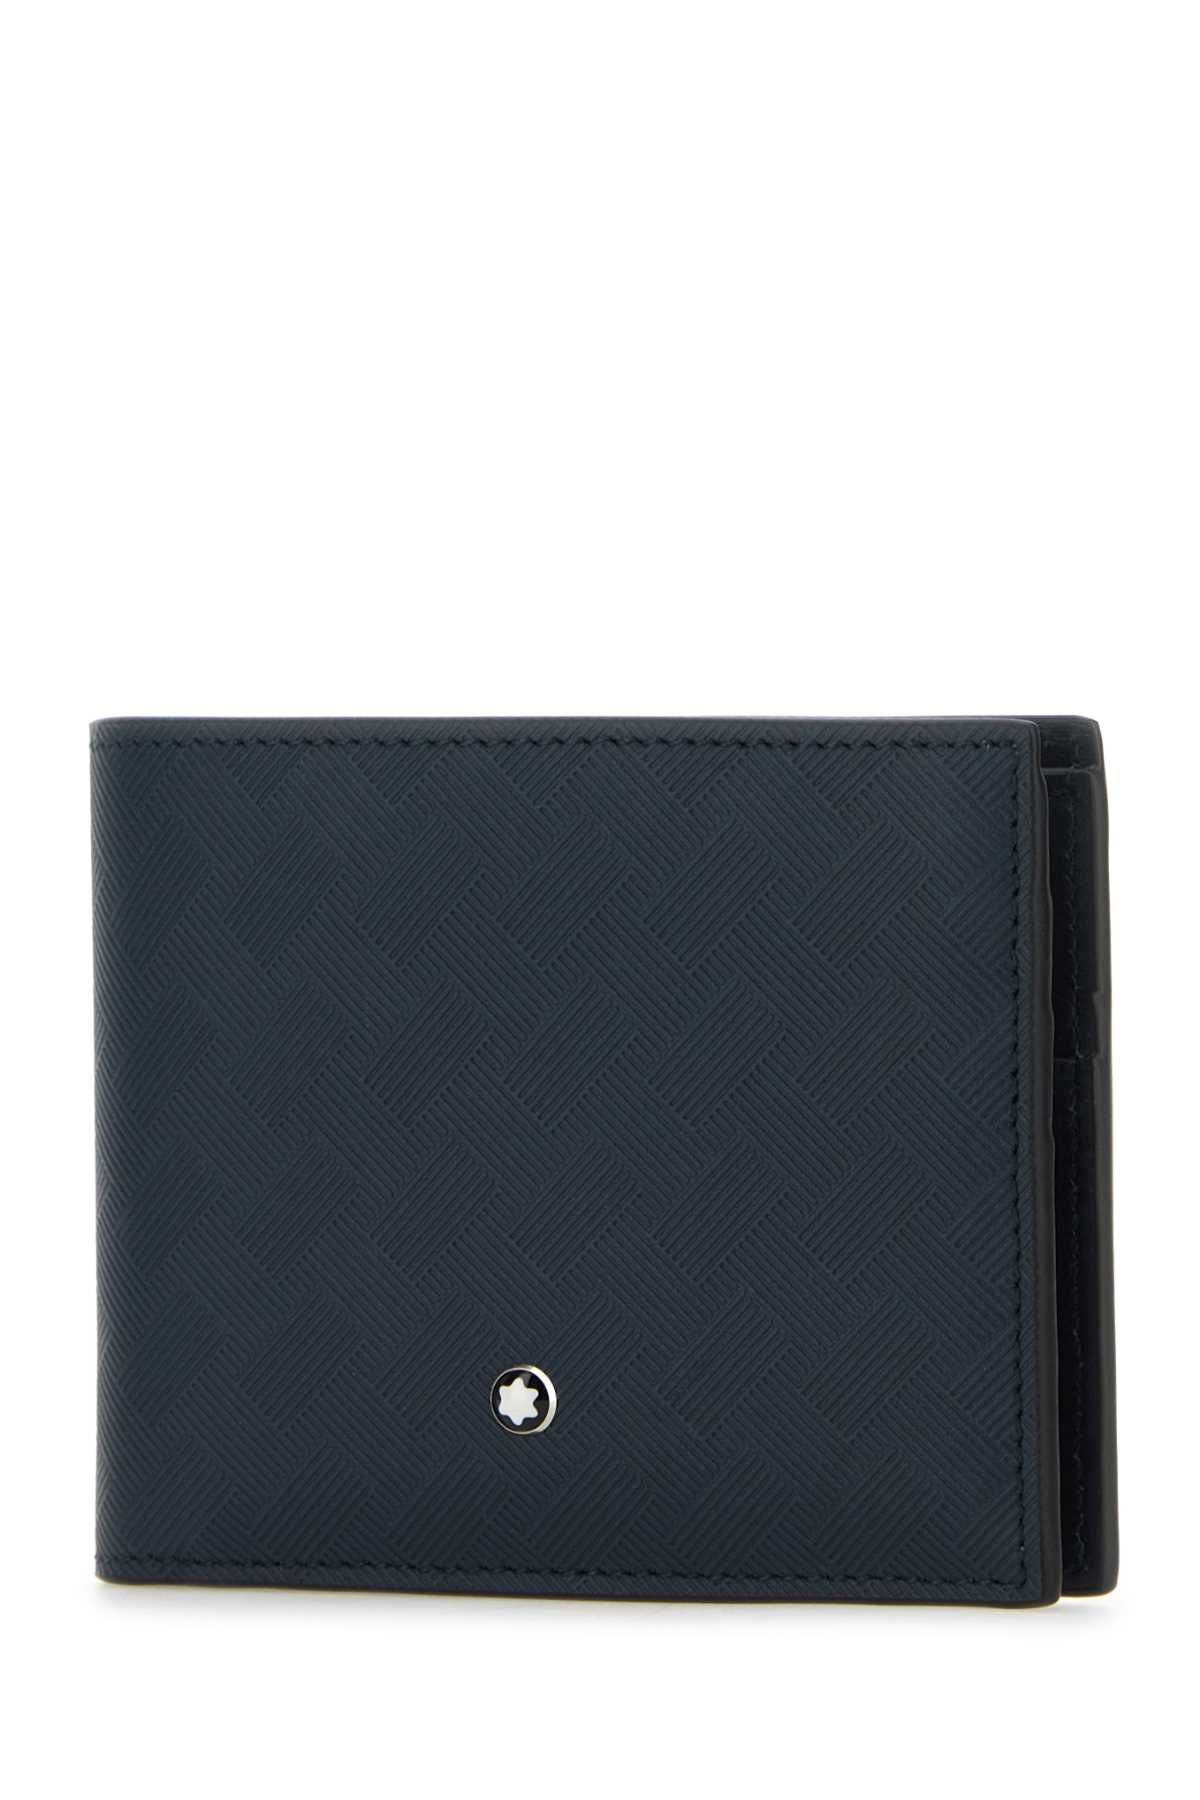 Montblanc Blue Leather Wallet In Inkblue